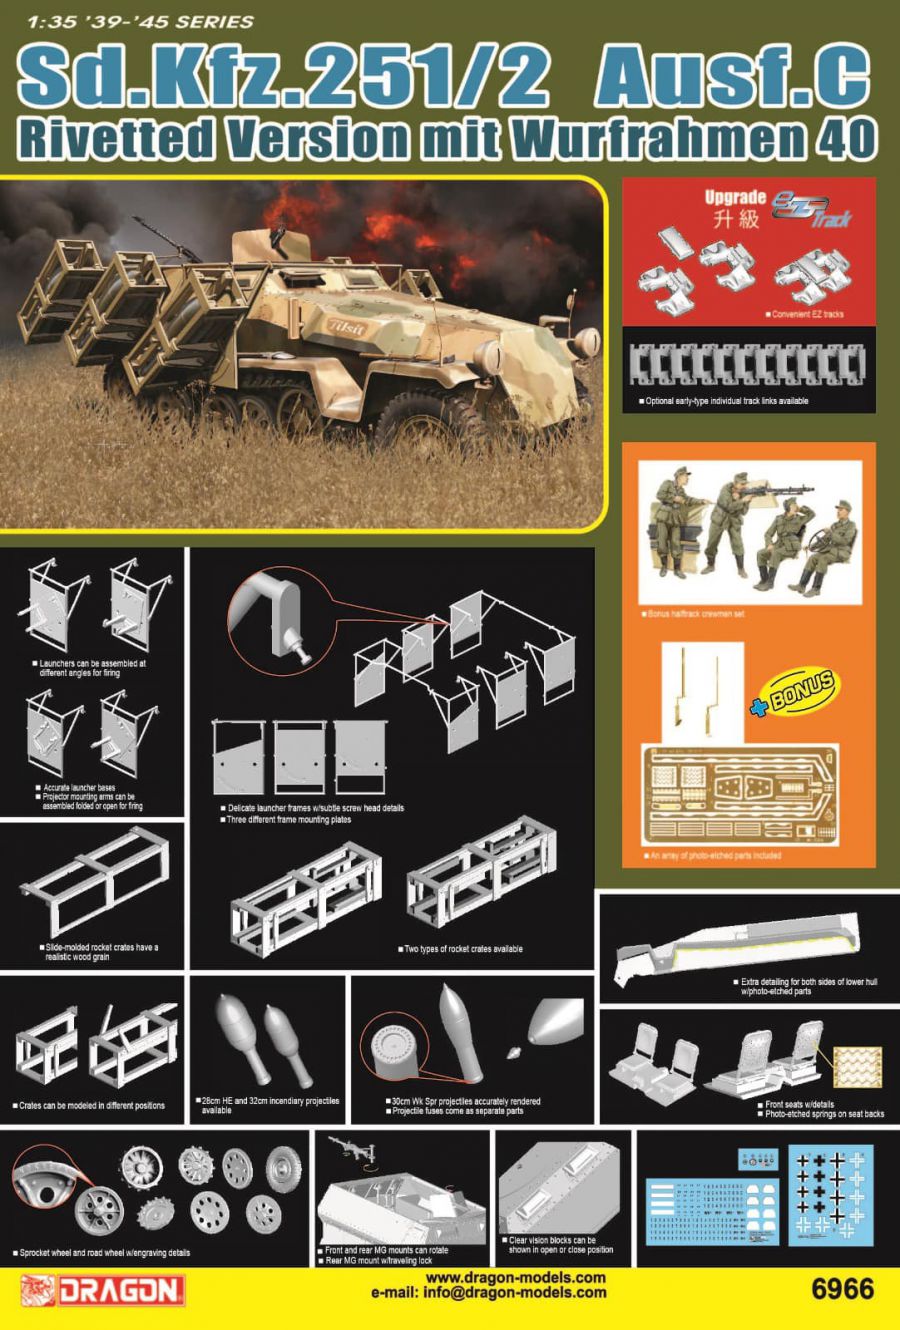 Dragon Models 1/35 SD.KFZ 251/1 AUSF C: Rivetted with Wurfrahmen 40